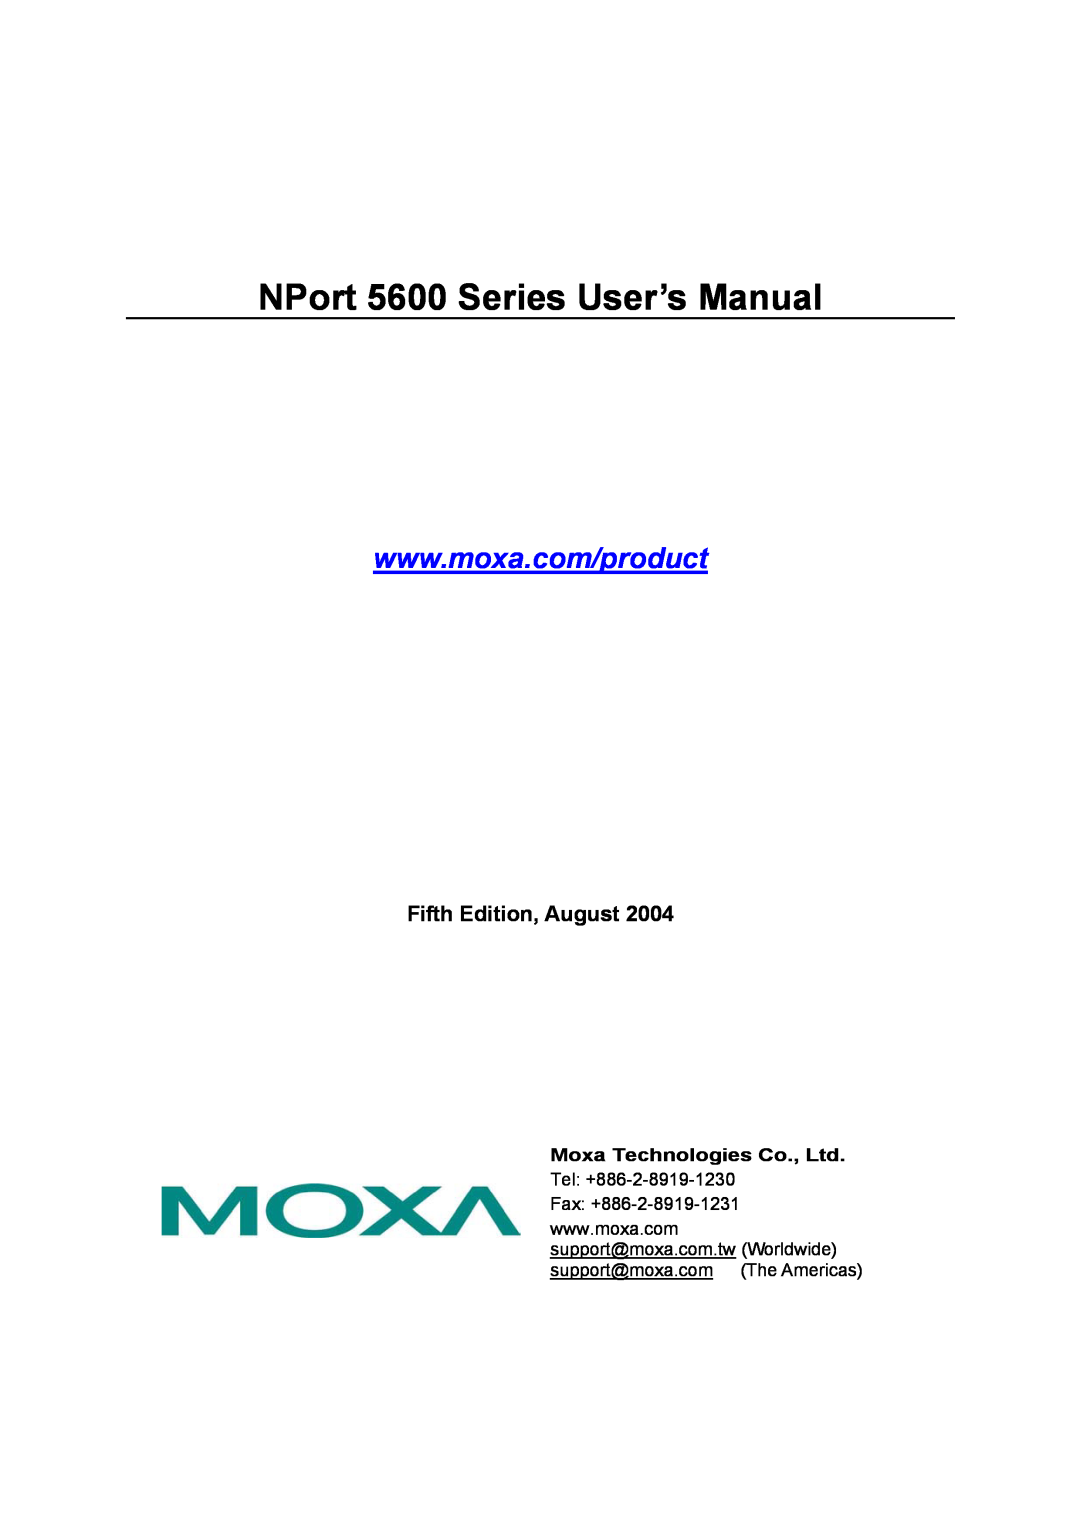 Moxa Technologies user manual NPort 5600 Series User’s Manual, Fifth Edition, August 